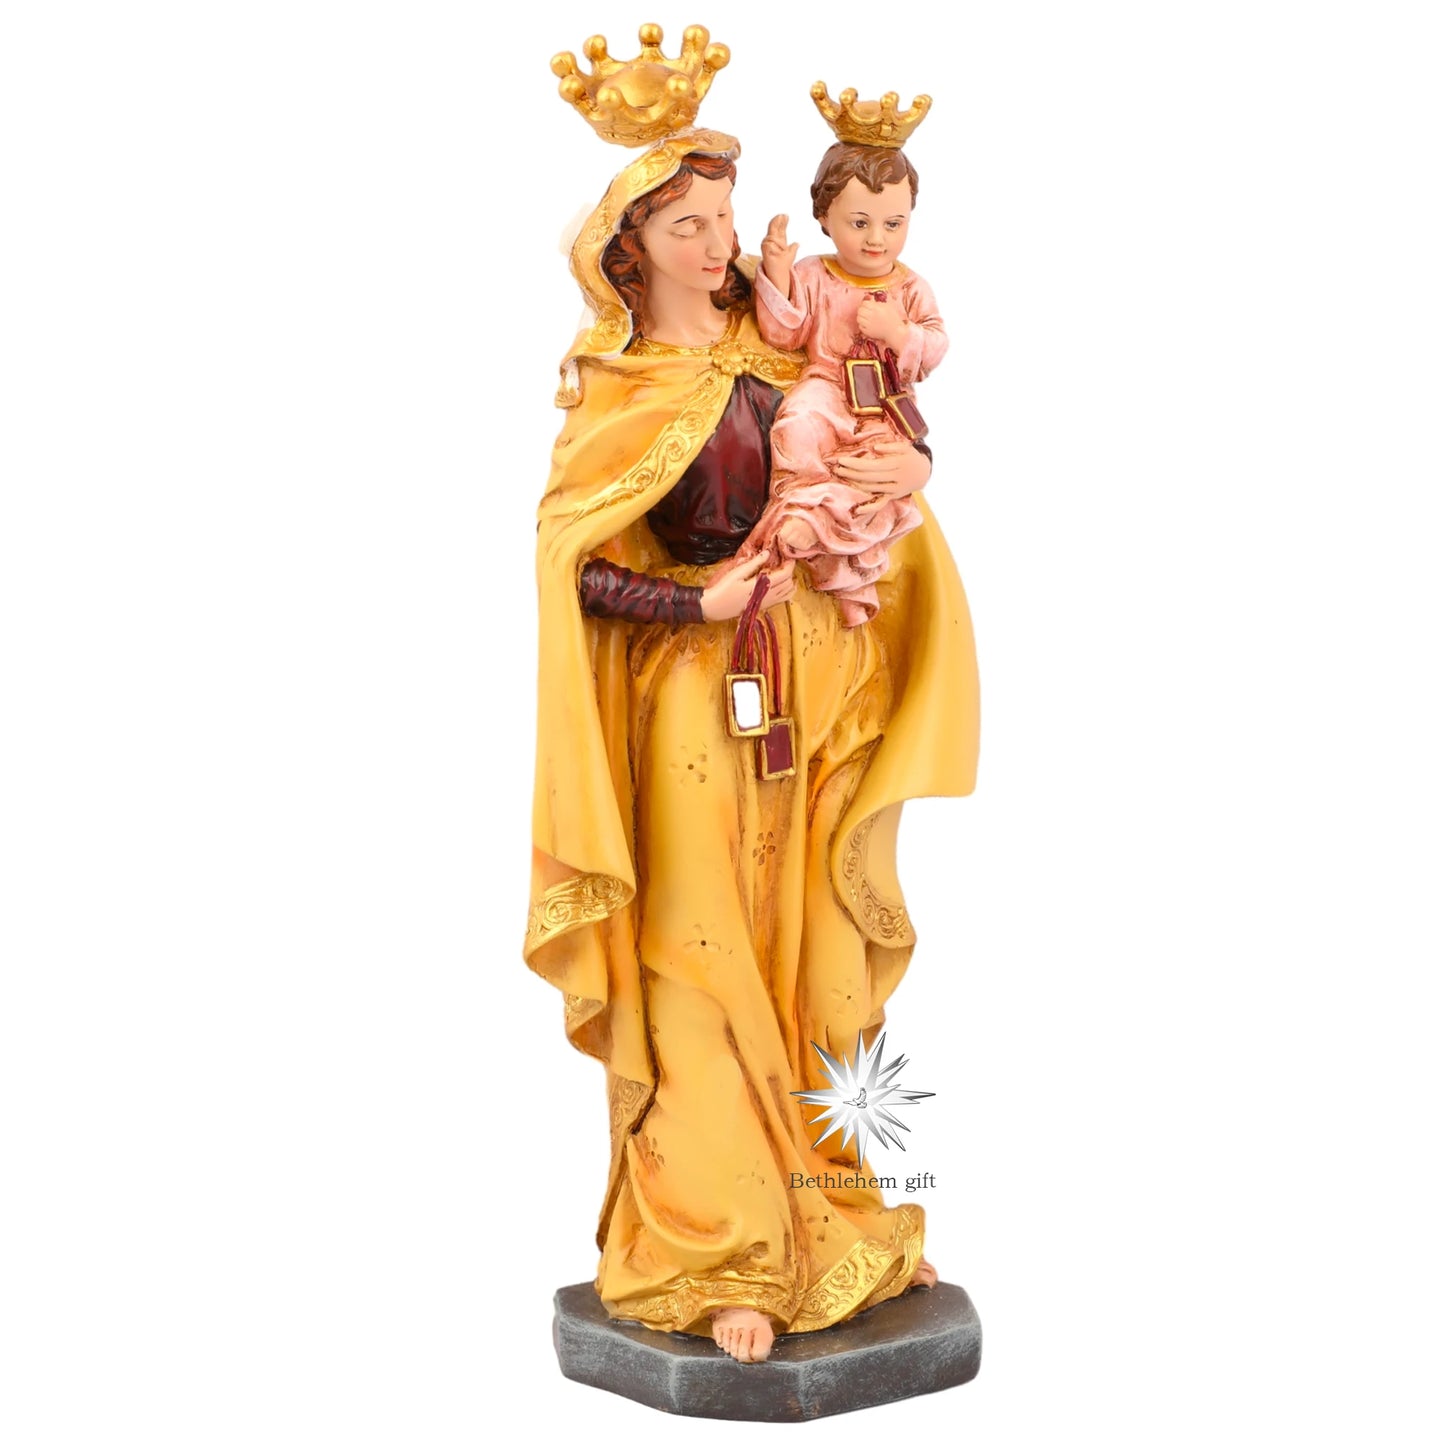 25cmH  Our Lady of Mount Carmel Virgin Mary & Child Statue Sculpture Holy Figurine for Home Catholic Decorative Ornament